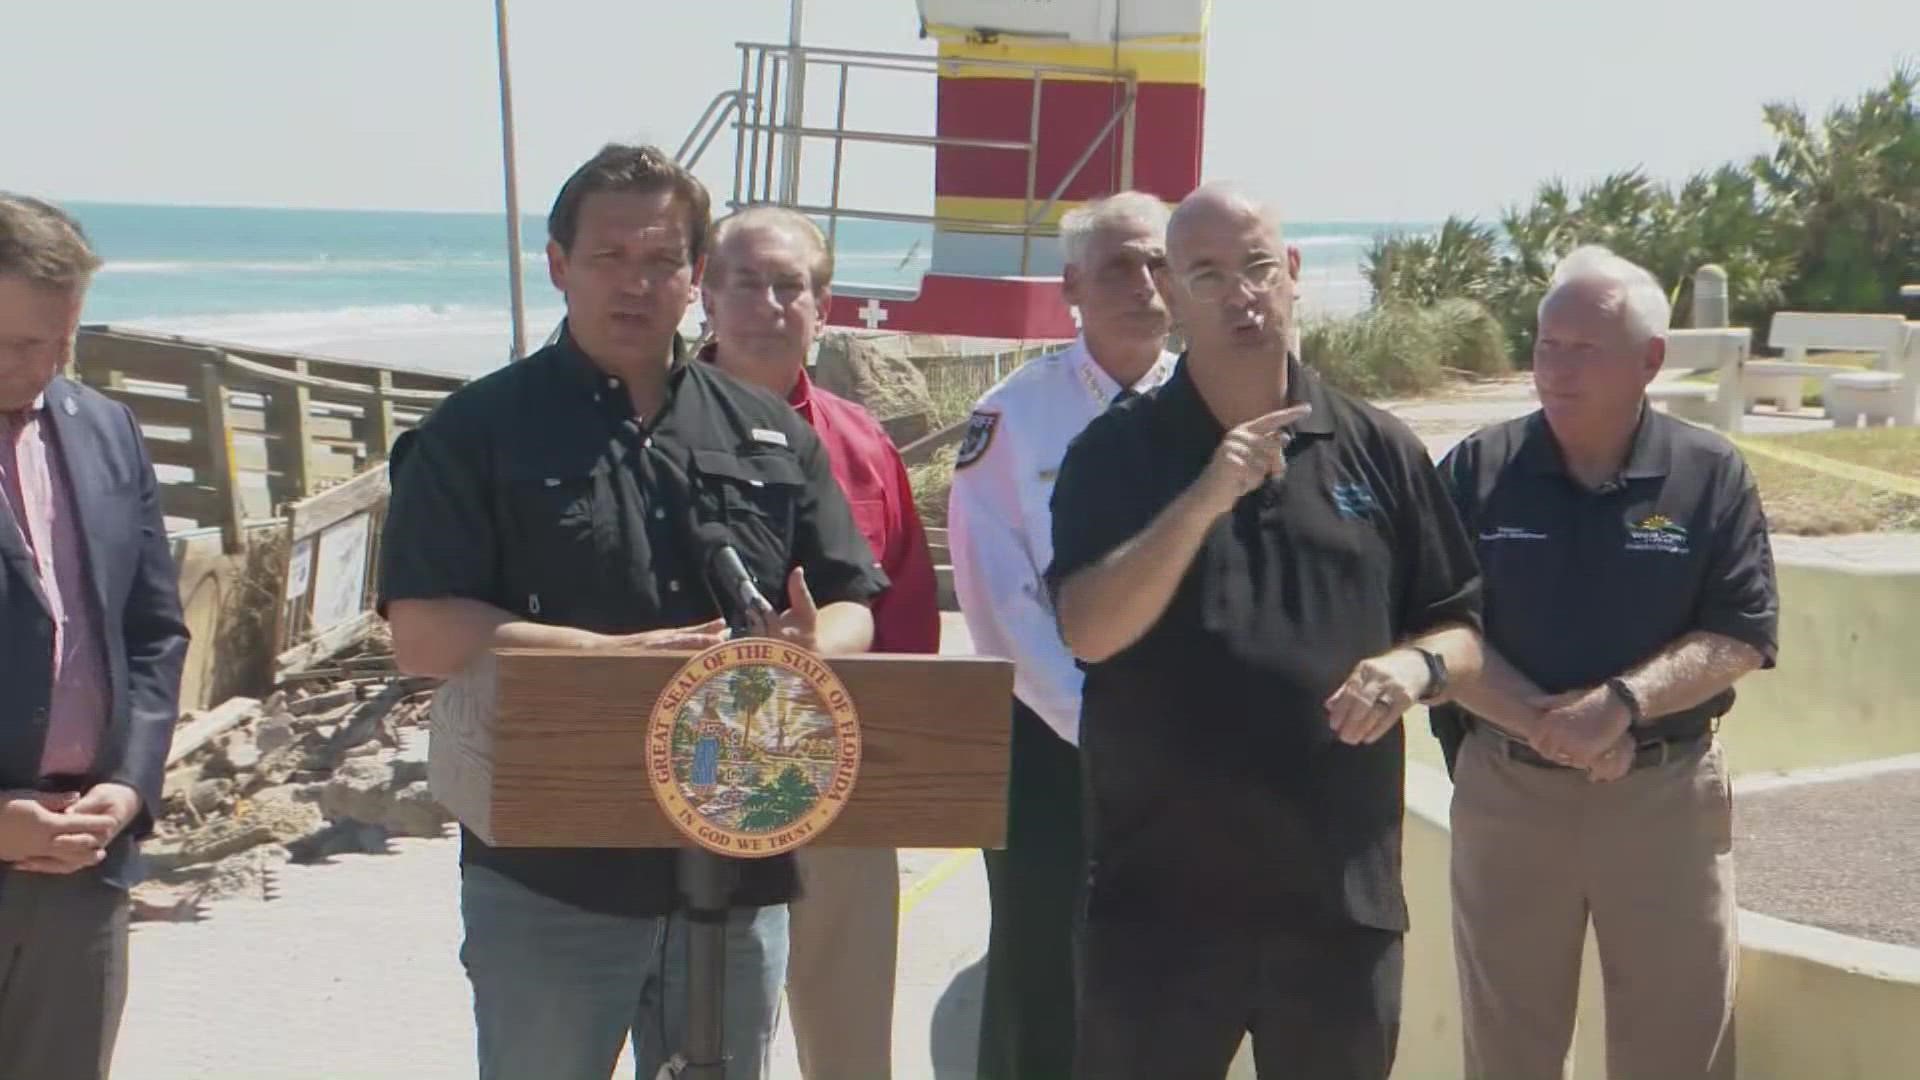 The Florida Governor was joined by DEP Secretary Shawn Hamilton.